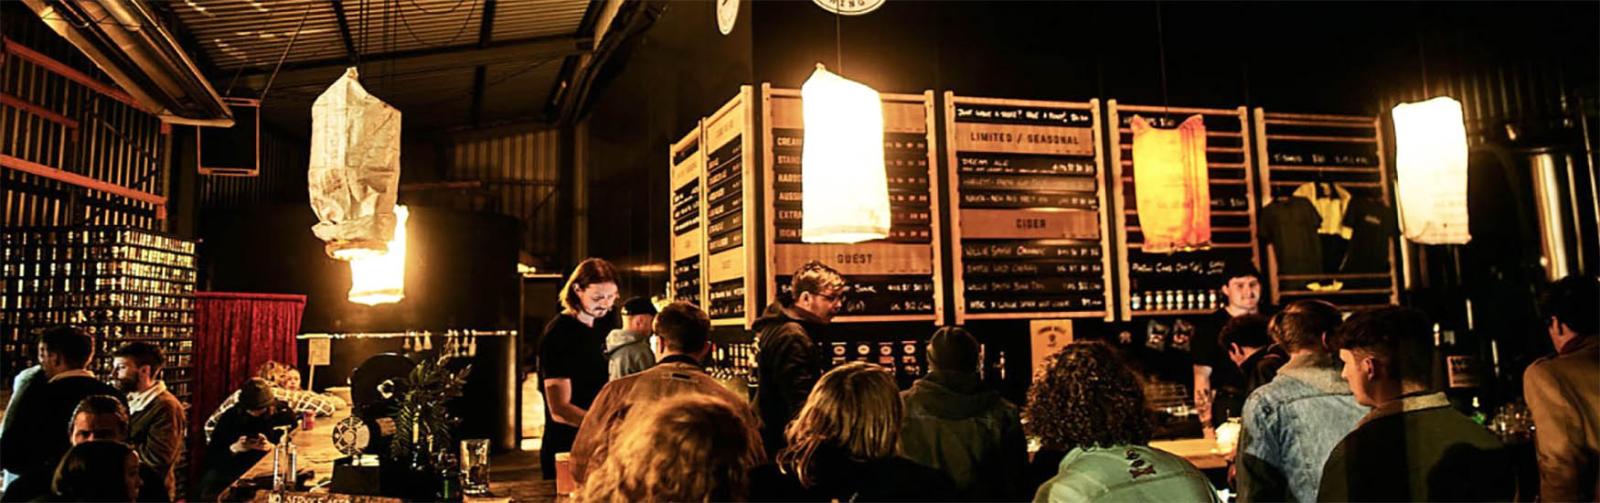 Craft Beer recommendations in Hobart